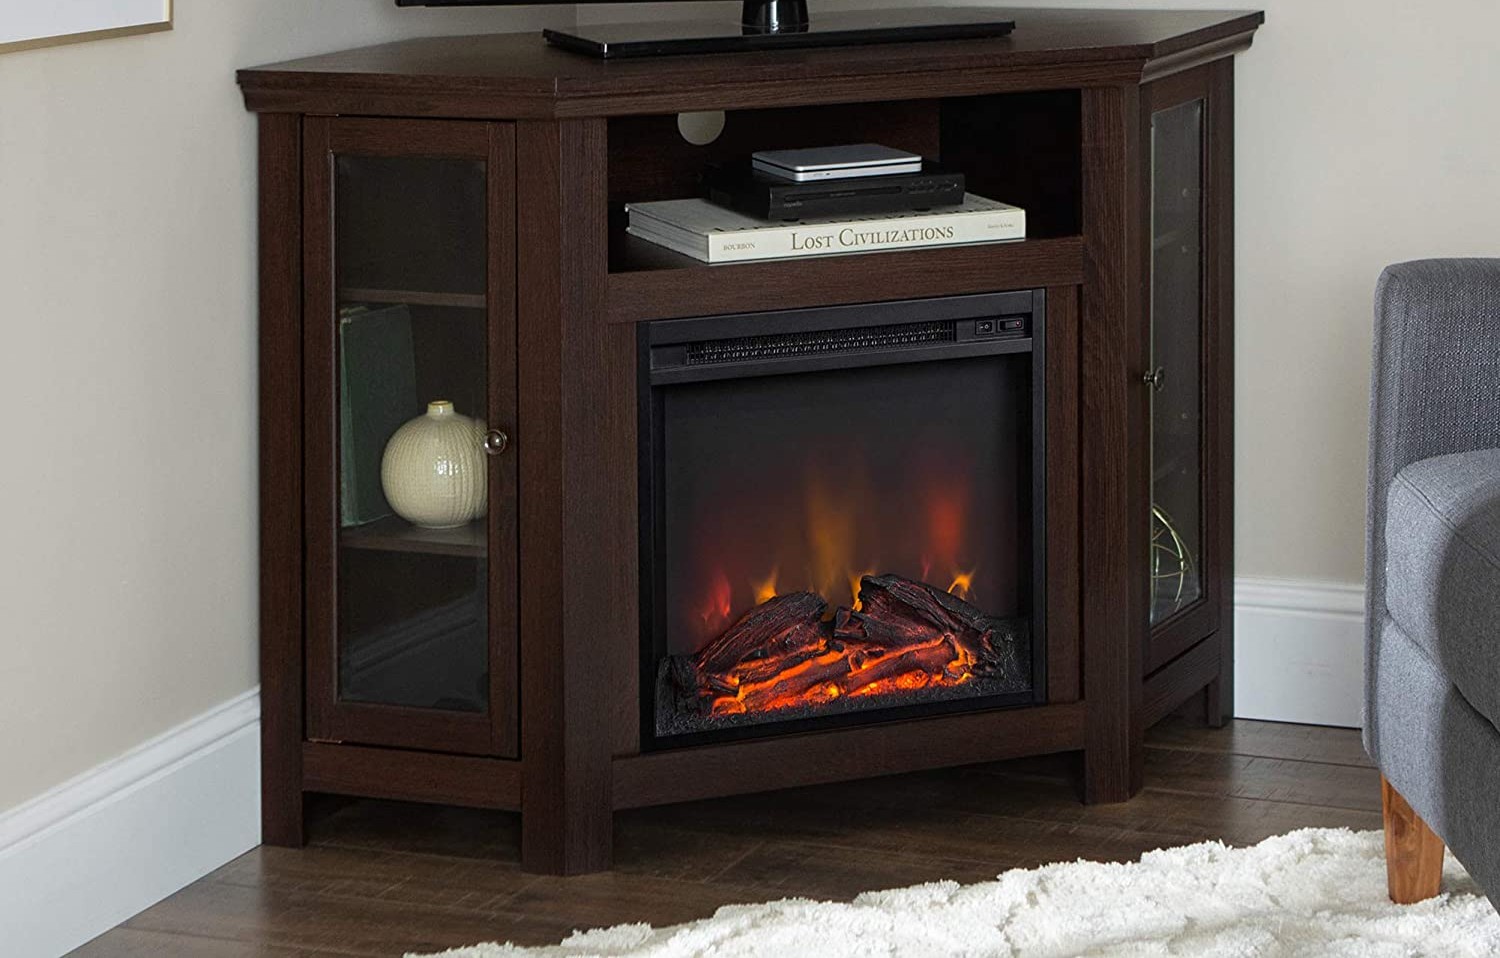 The best electric fireplace heater tv console displaying a warm fire, a tv, books, and other decor items.